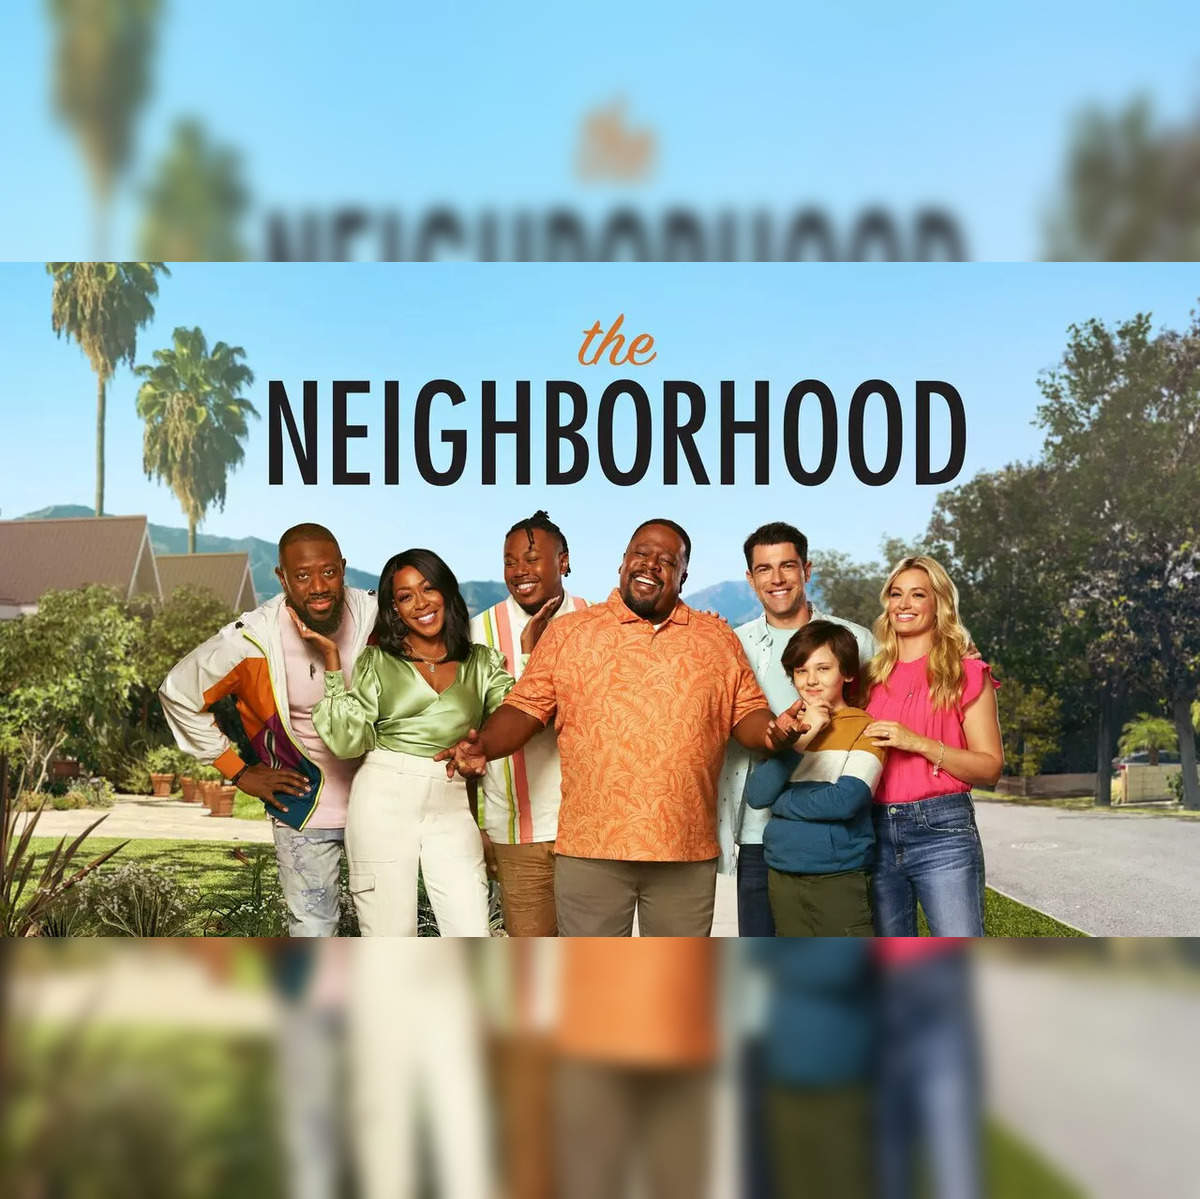 Neighborhood Season 6: The Neighborhood Season 6: This is what we